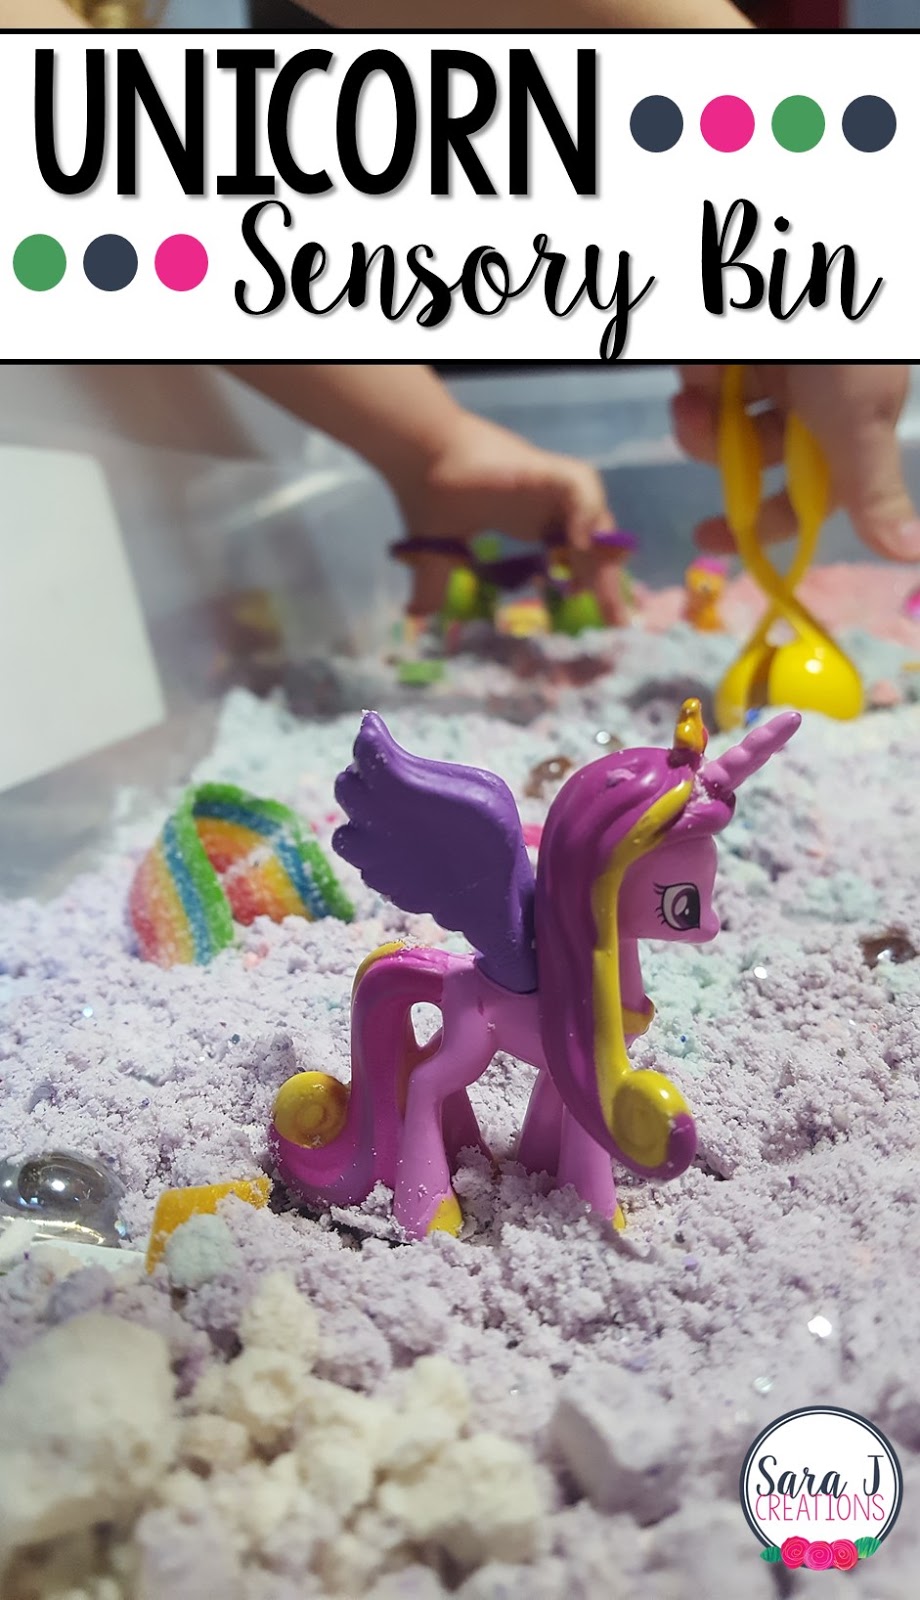 Unicorn sensory bin with colored cloud dough. Perfect for fine motor and alphabet practice for toddlers and preschoolers.